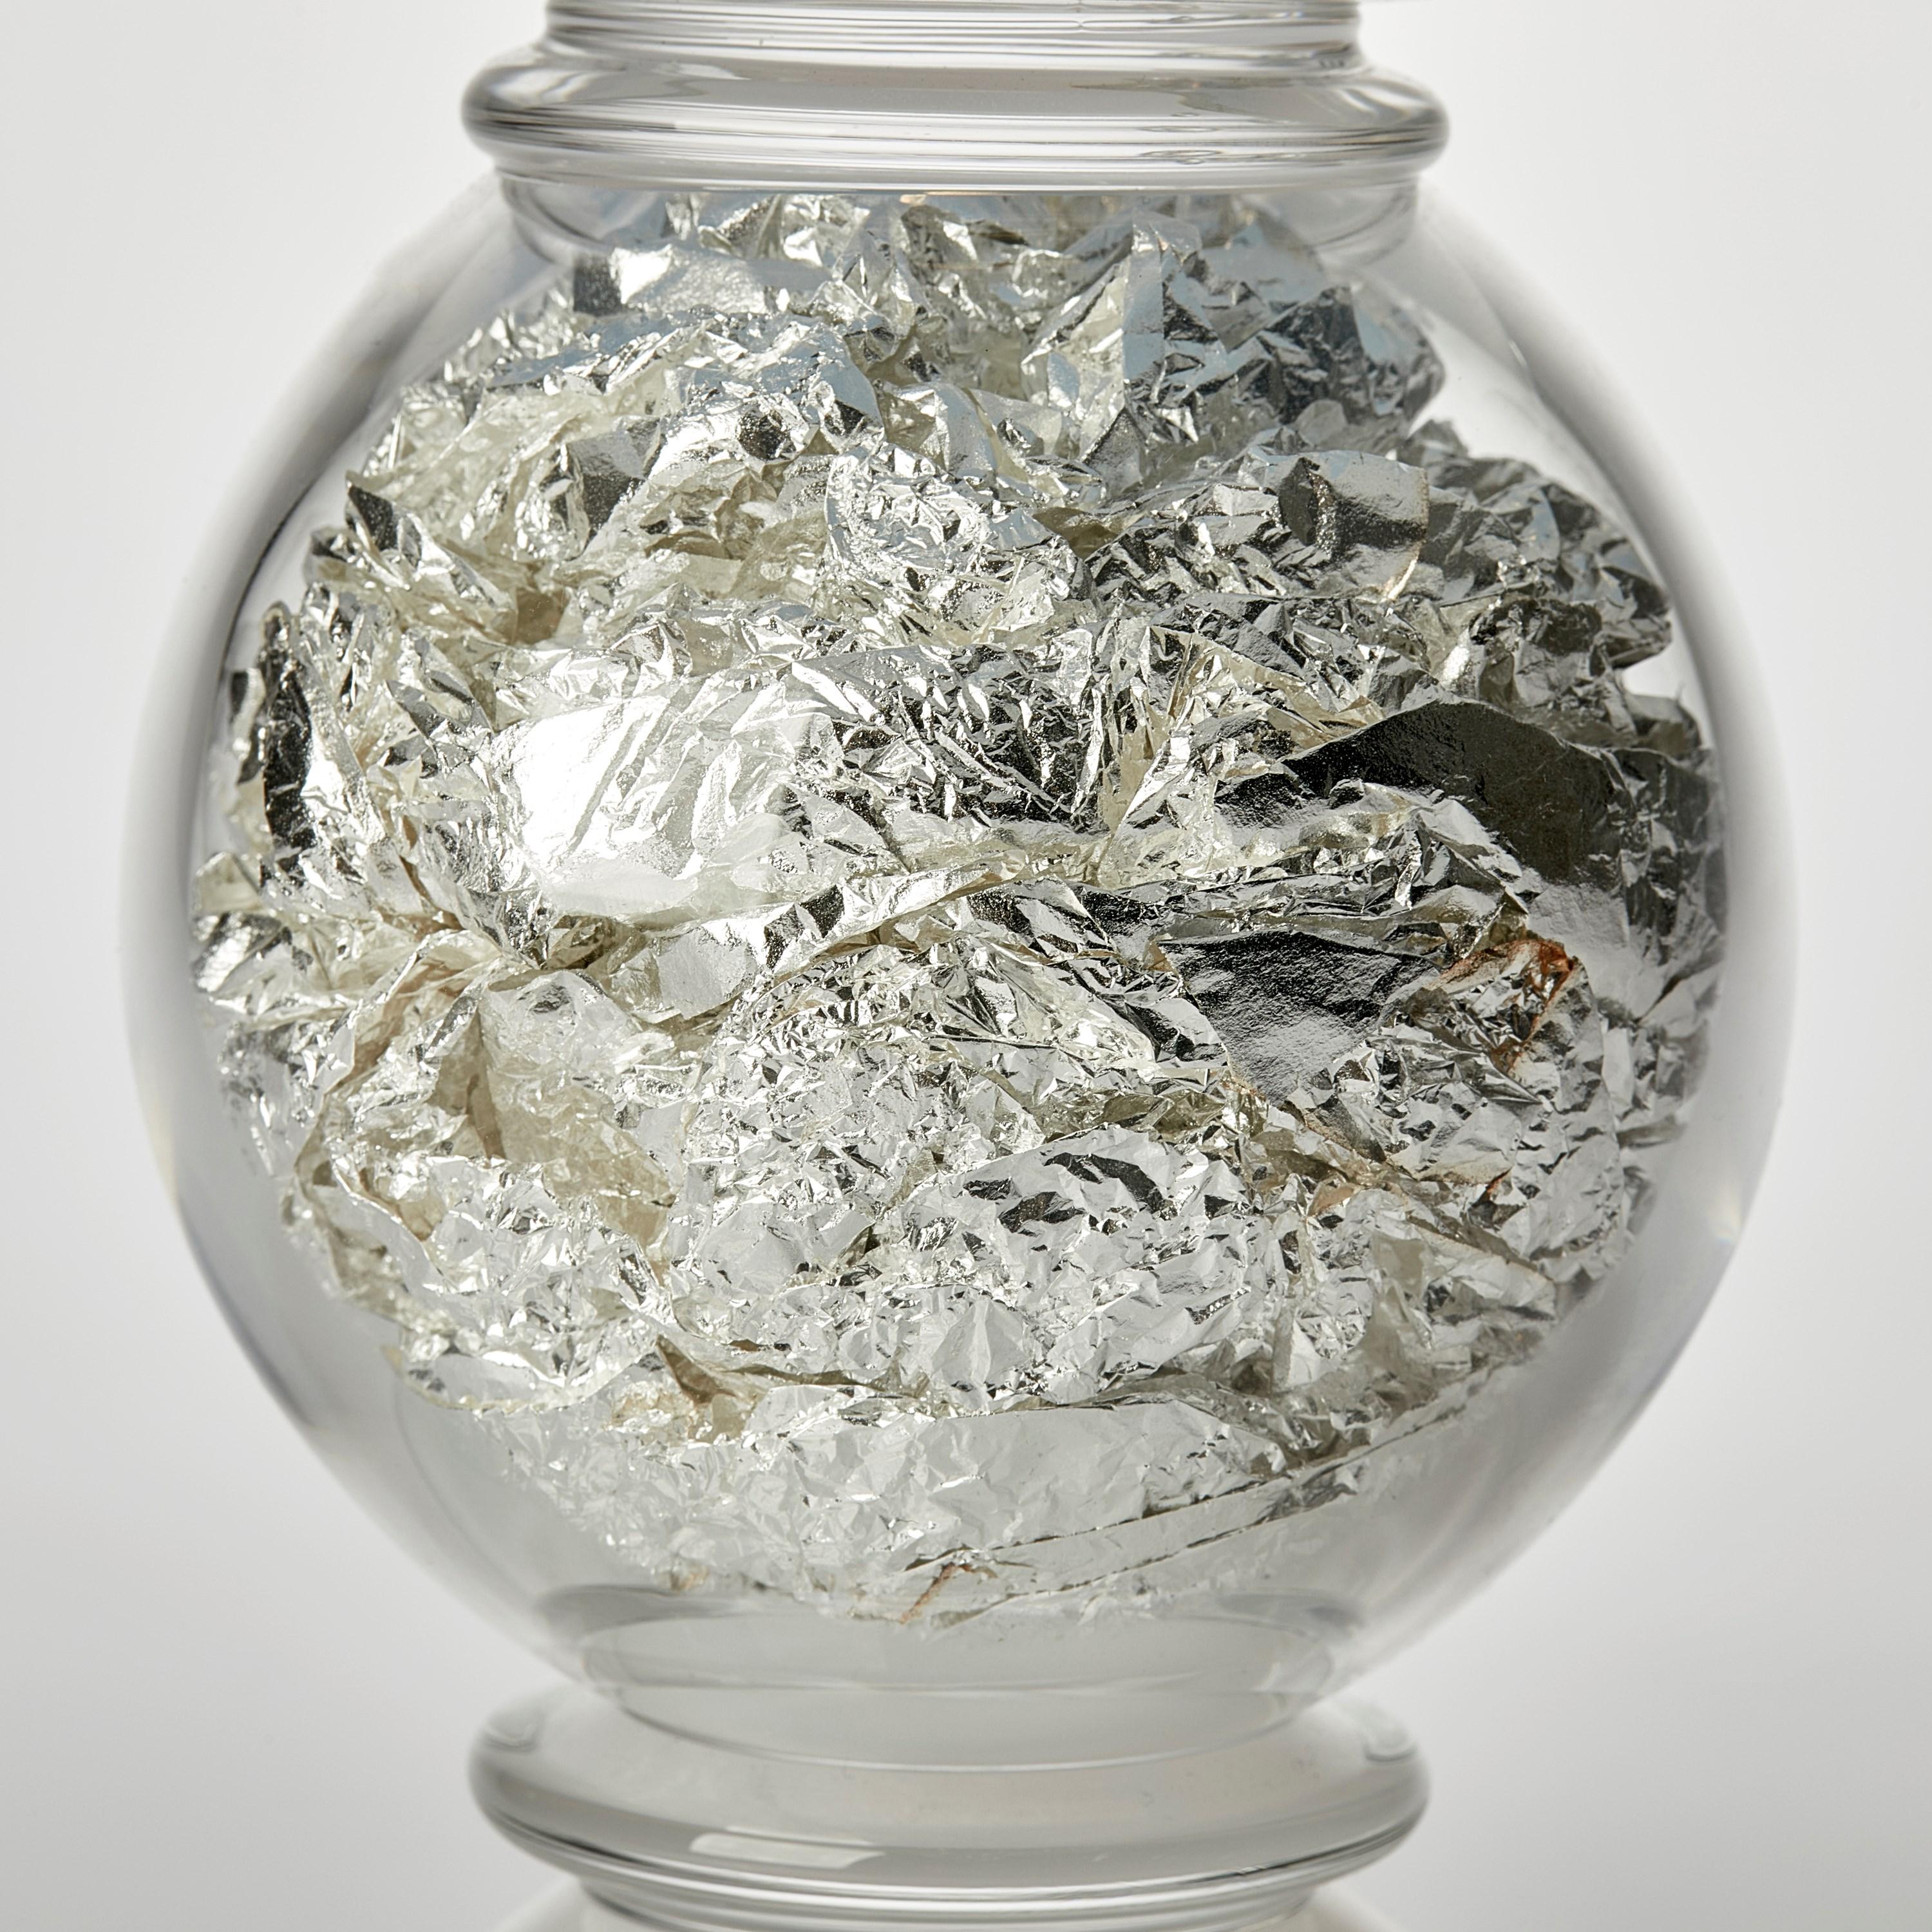 Organic Modern Gambo d’Argento a milky white glass & silver leaf centrepiece by Anthony Scala For Sale